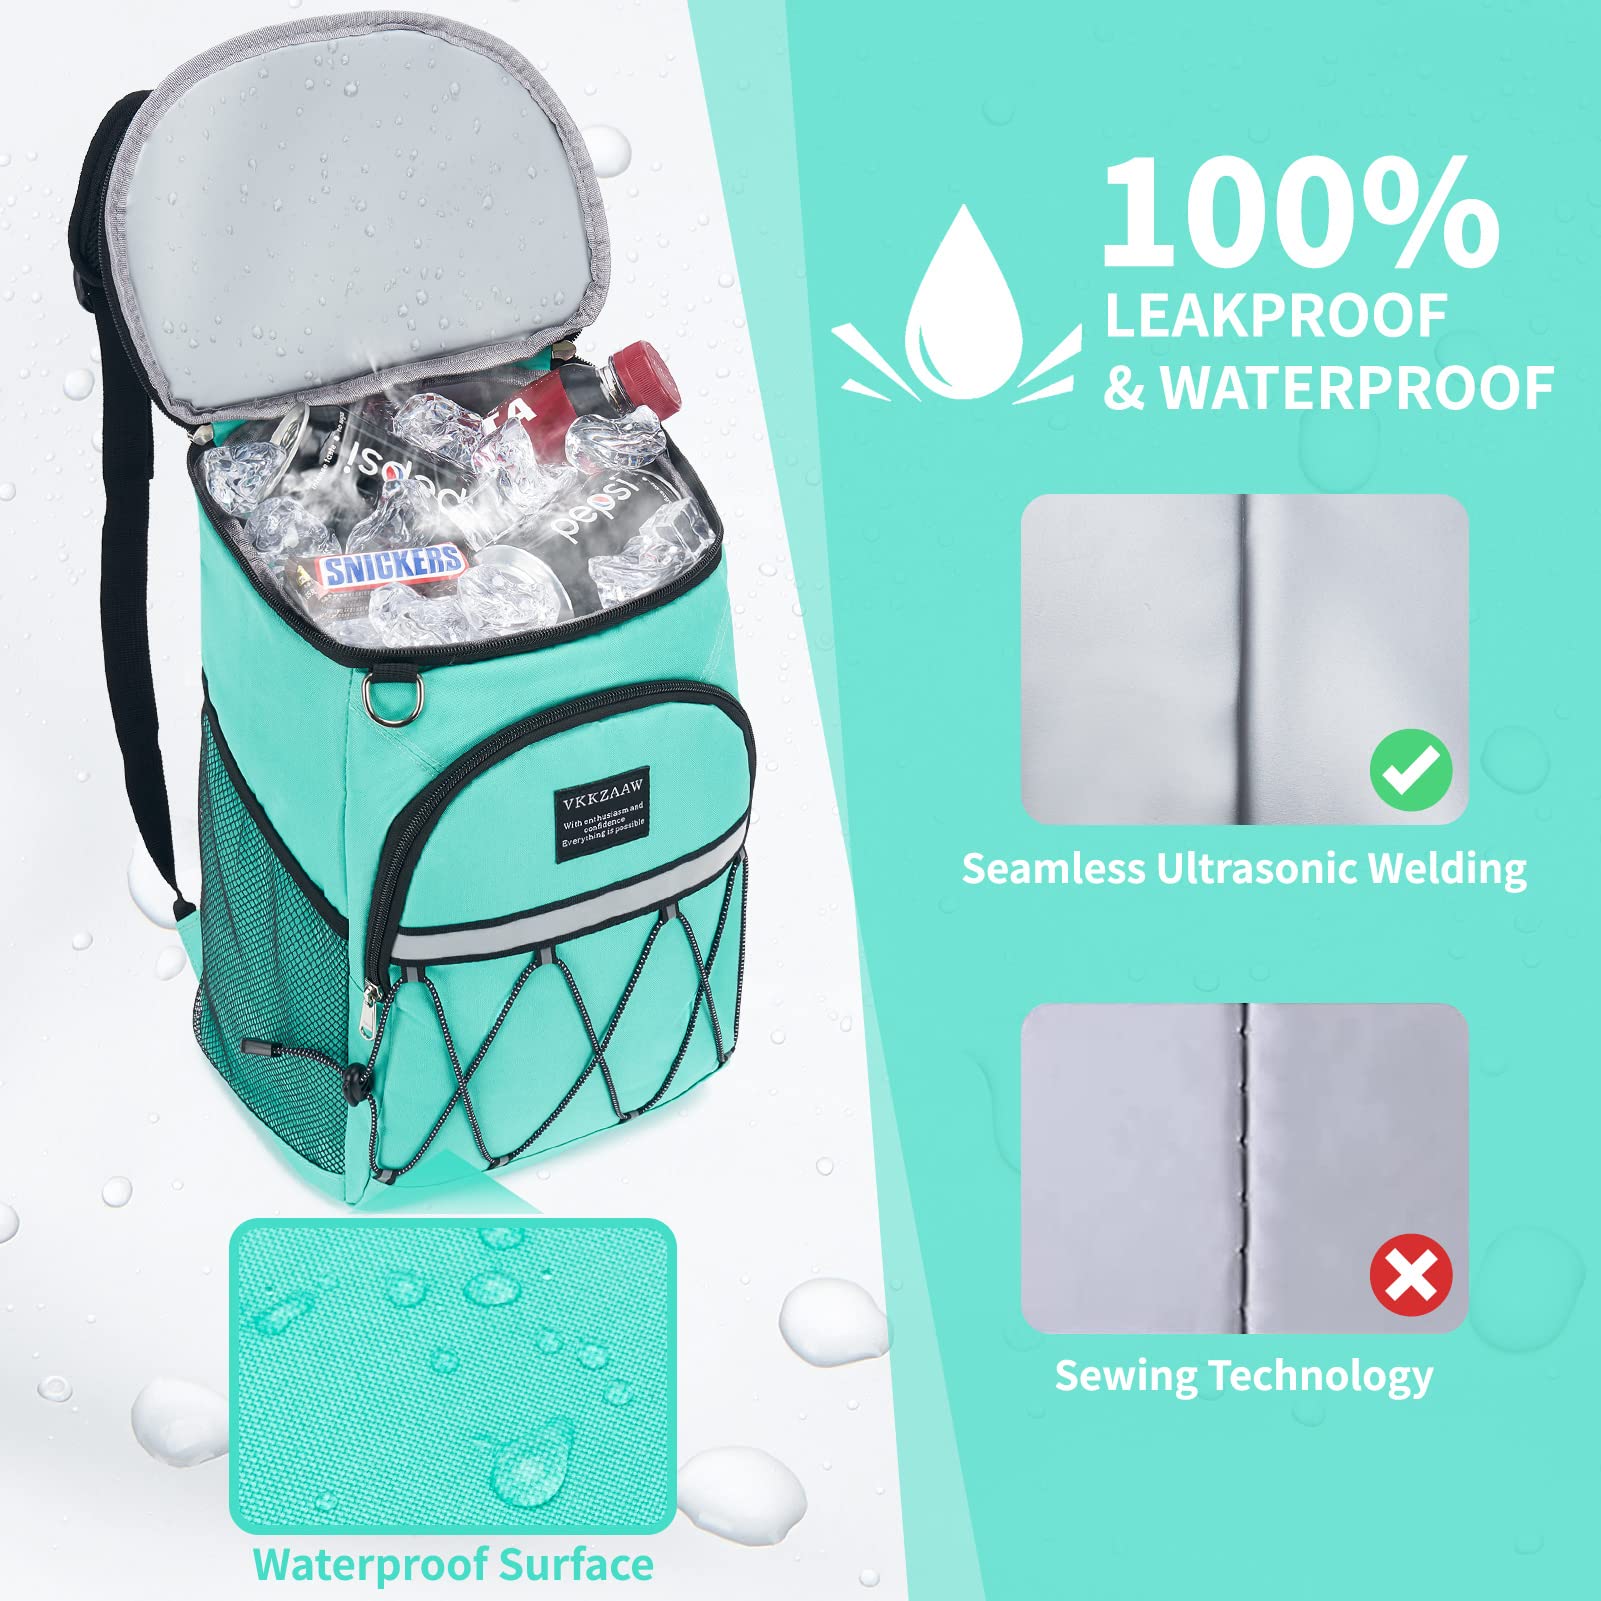 Backpack Cooler Backpack 26 Cans Insulated Leak Proof for Women Men Beach Camping Picnic Fishing Hiking Lunch Backpack Waterproof Cooler